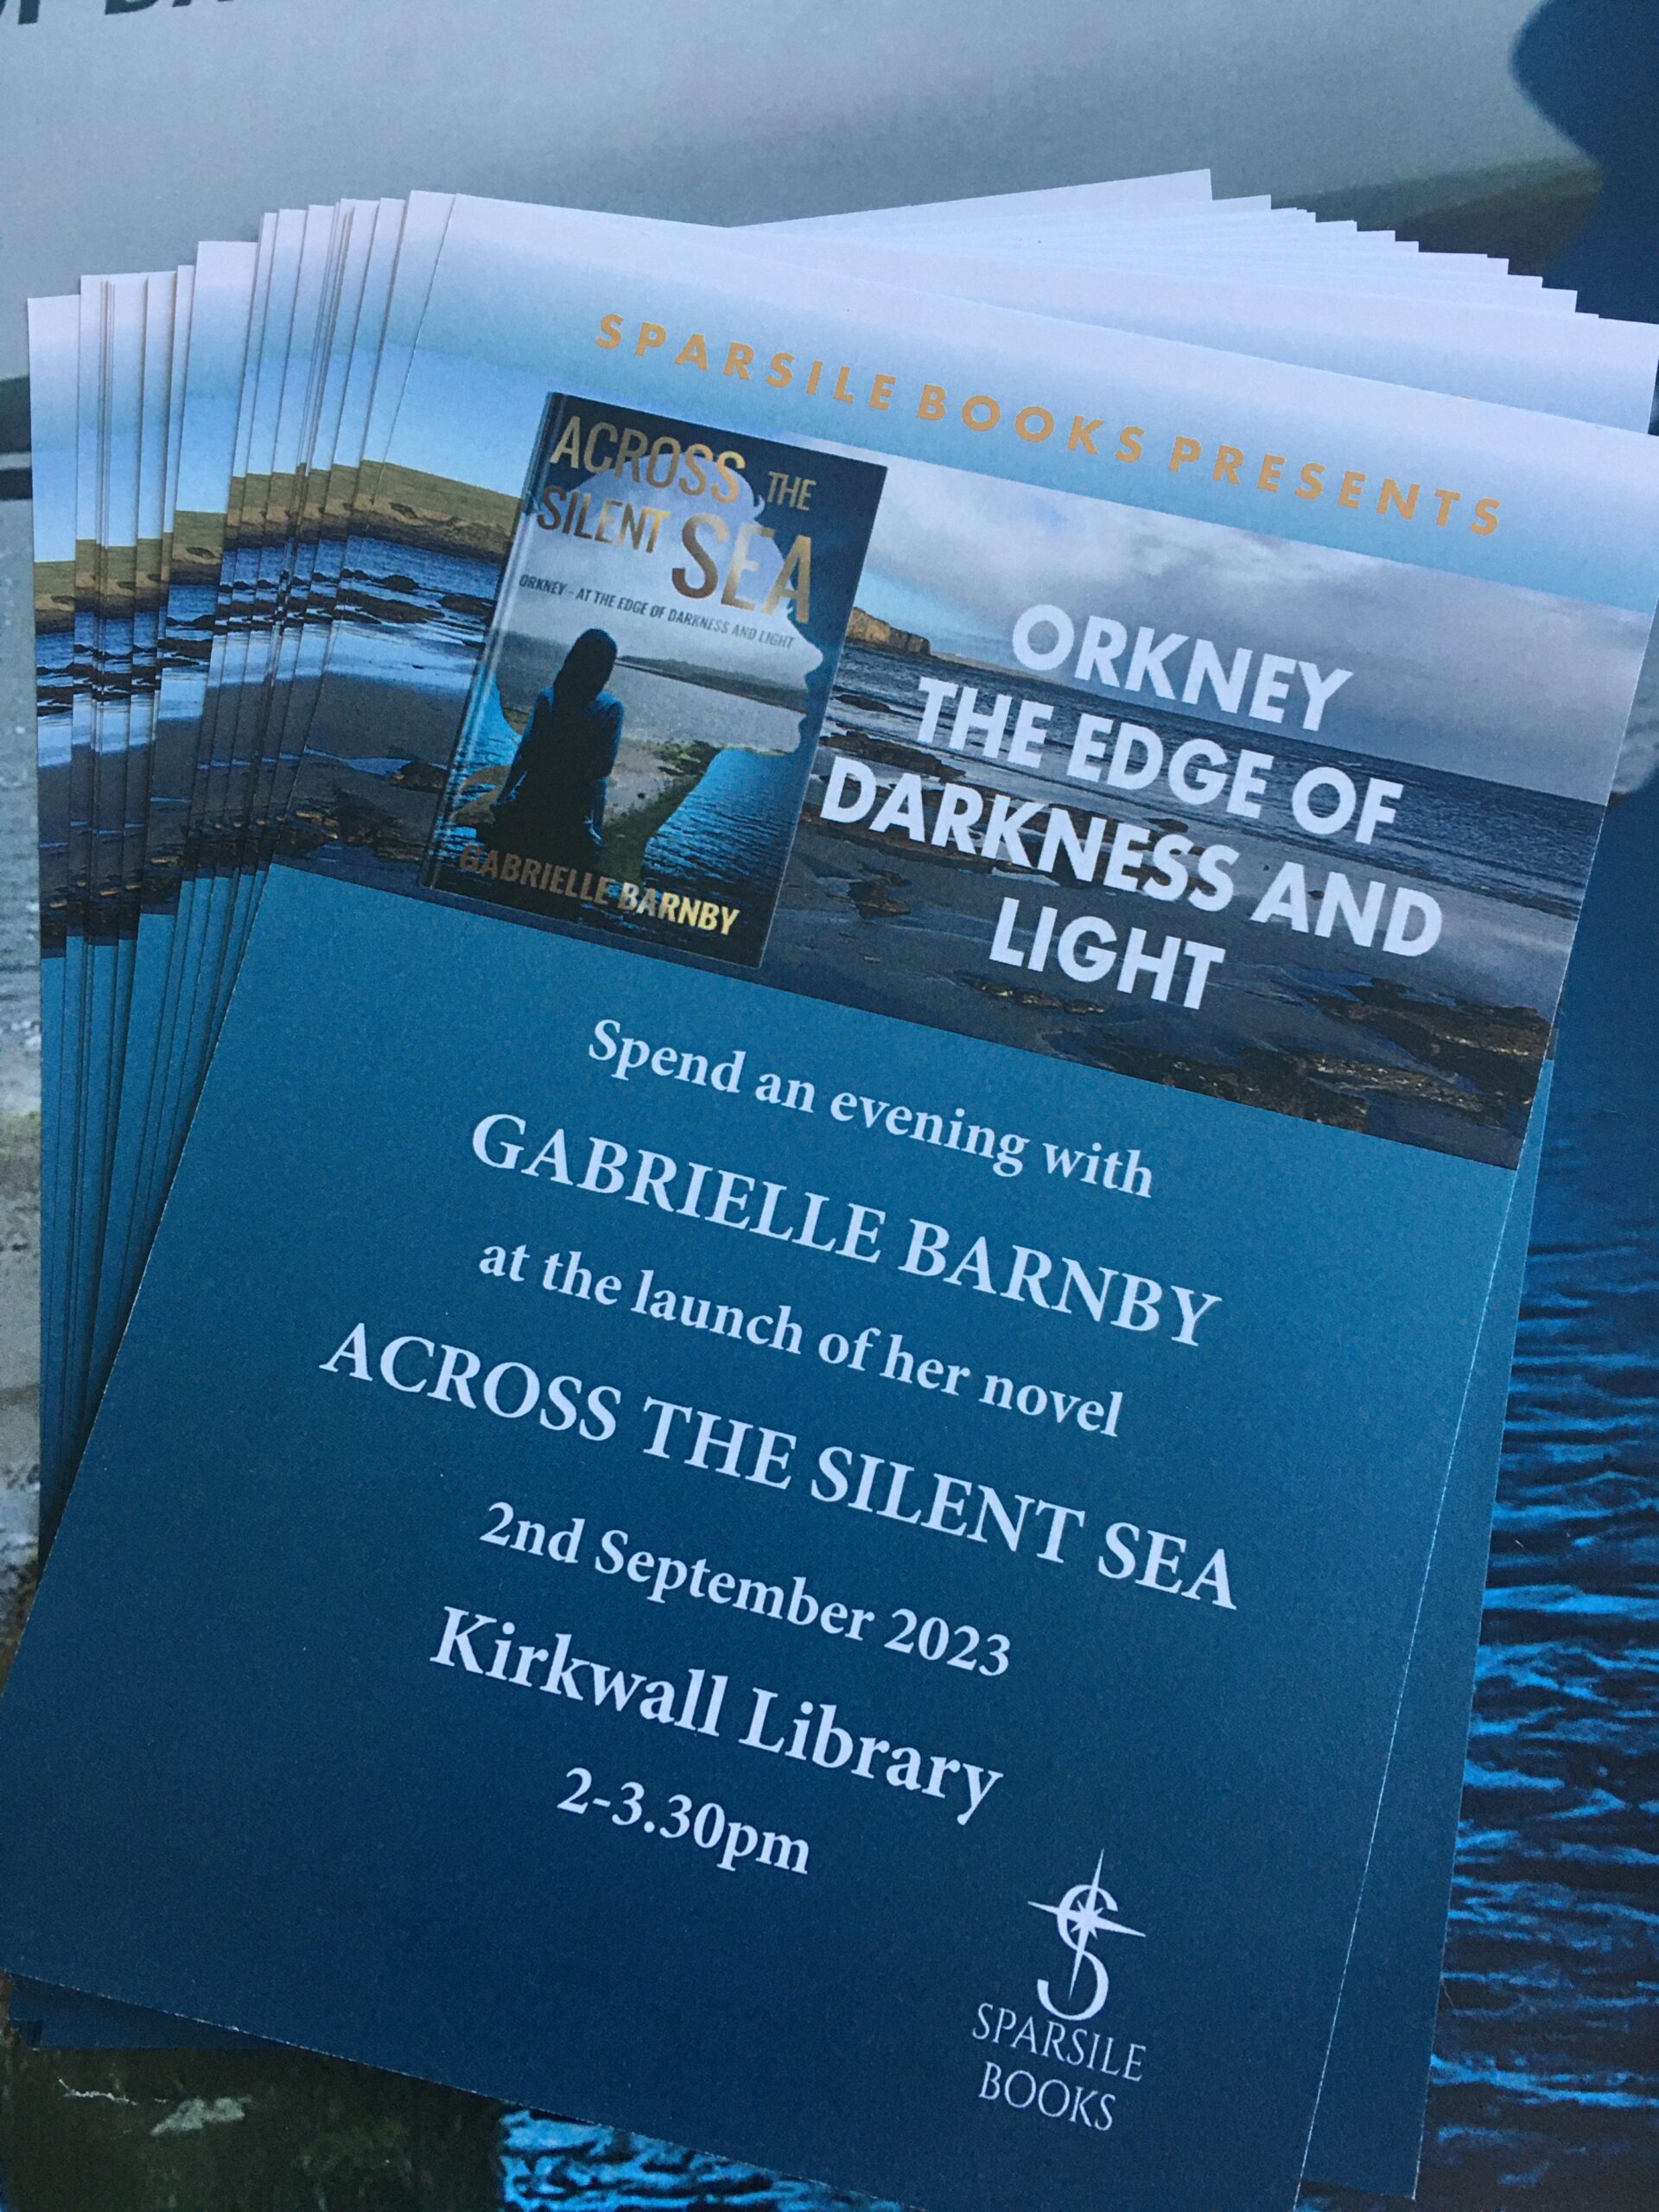 Gabrielle Barnby, Across the Silent Sea, new novel set in Orkney, book launch celebration